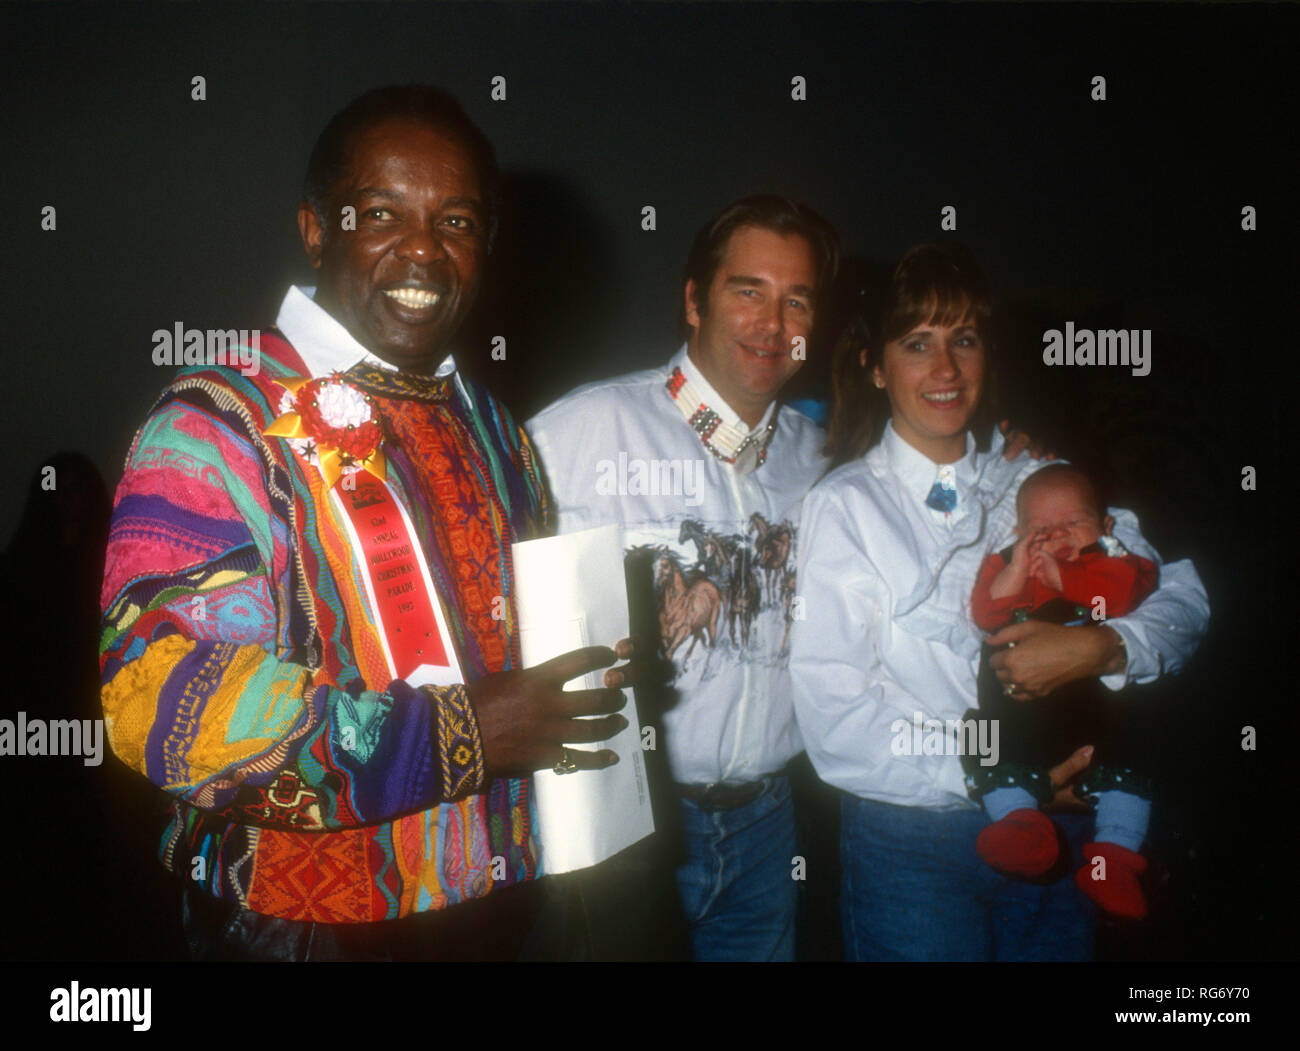 HOLLYWOOD, CA - NOVEMBER 28: Singer Lou Rawls, actor Beau Bridges and wife Wendy Treece Bridges attend the 62nd Annual Hollywood Christmas Parade on November 28, 1993 at KTLA Studios in Hollywood, California. Photo by Barry King/Alamy Stock Photo Stock Photo